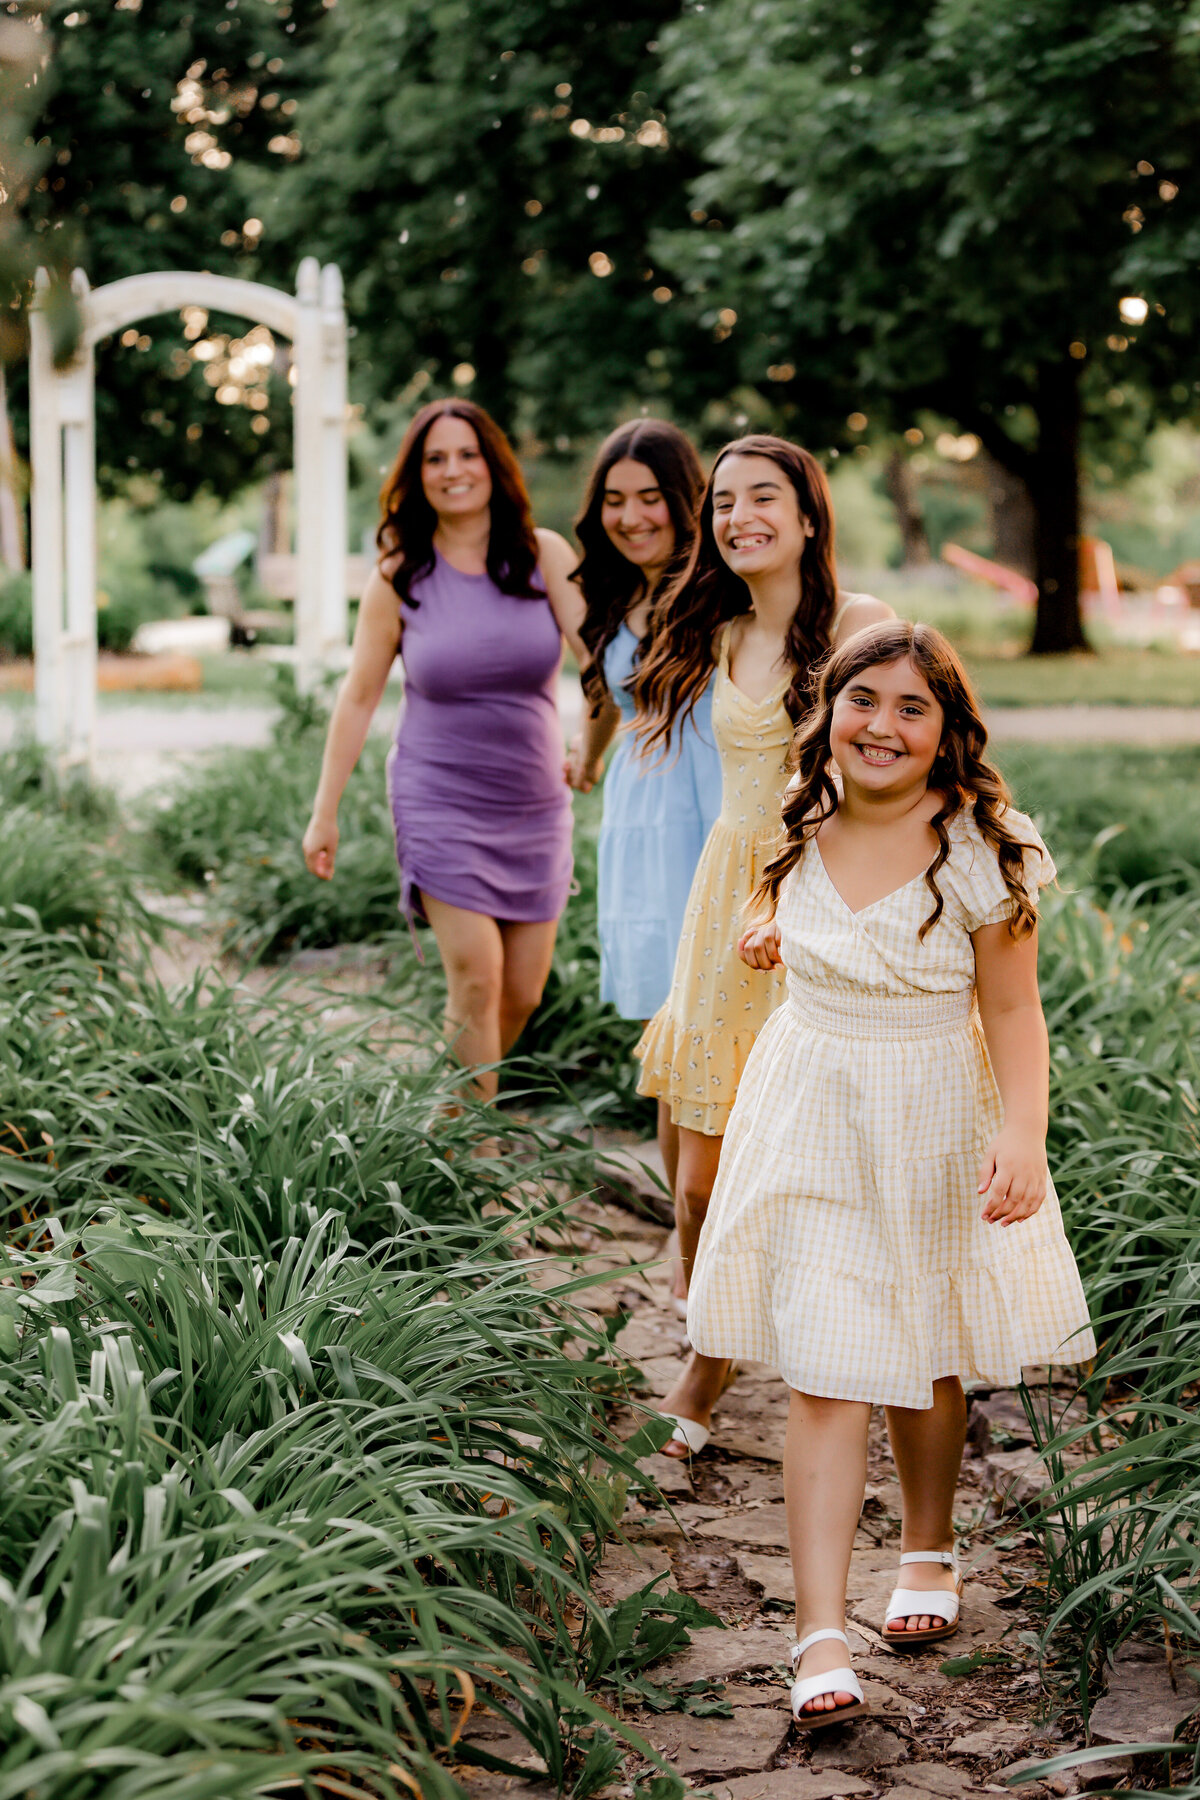 A girl and her family hold hands while she leads them through a path.